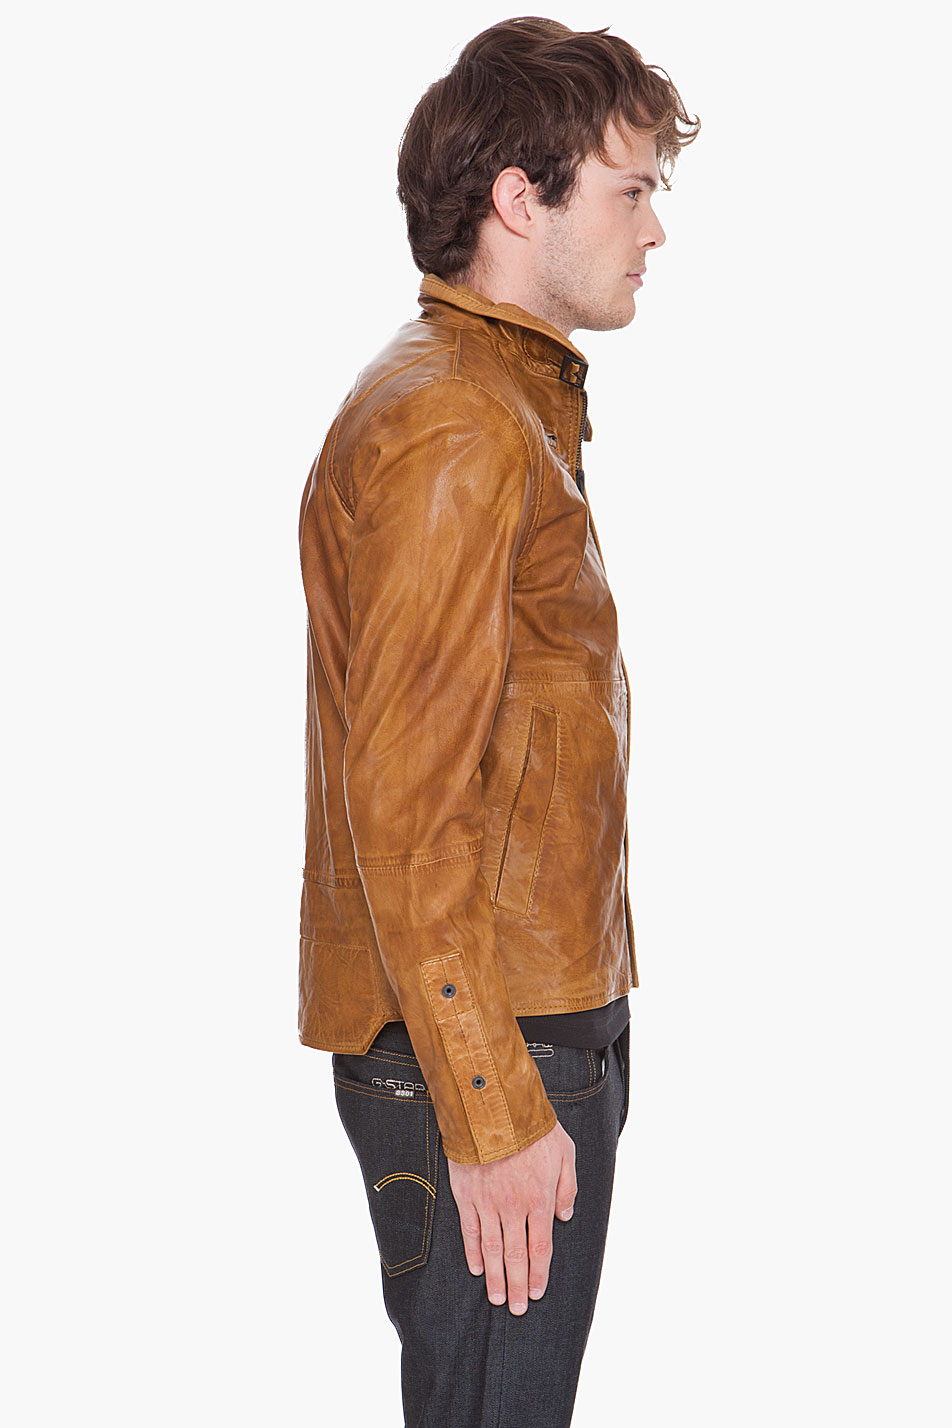 G-Star RAW Brando Leather Jacket in Tan (Natural) for Men - Lyst